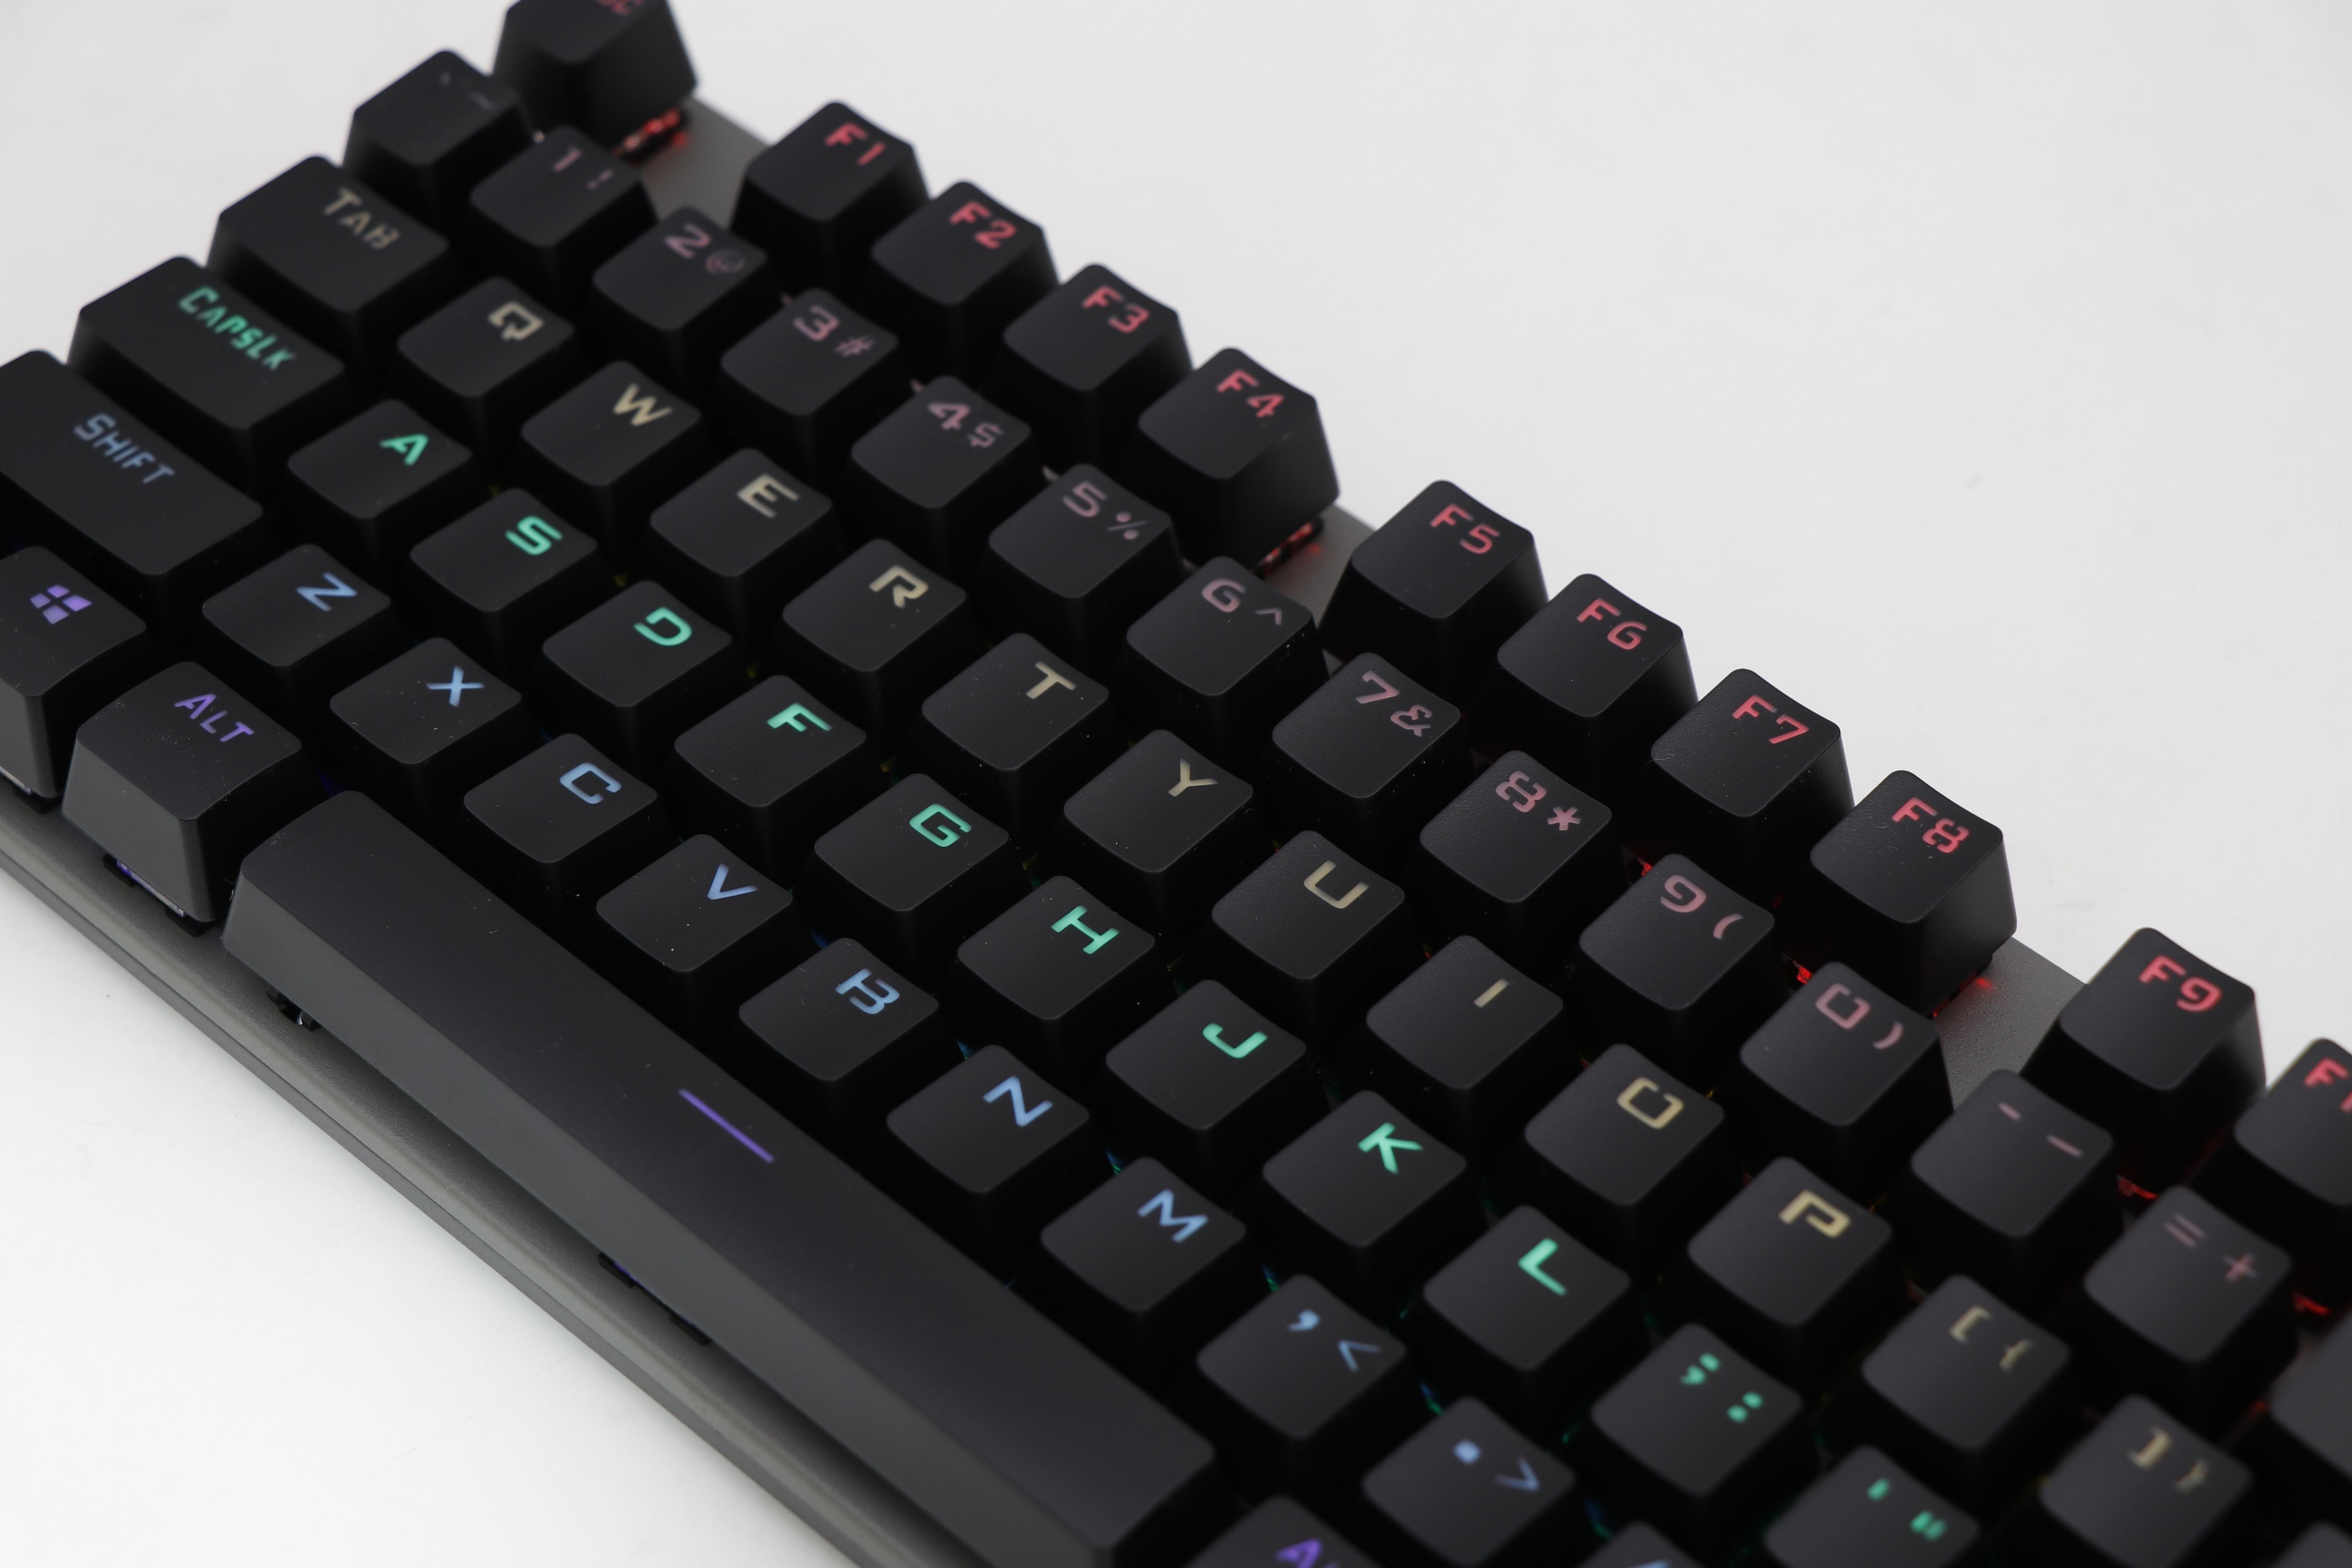 Gaming Keyboard JEDEL KL-95 Mechanical Quiet Backlit Lateral view